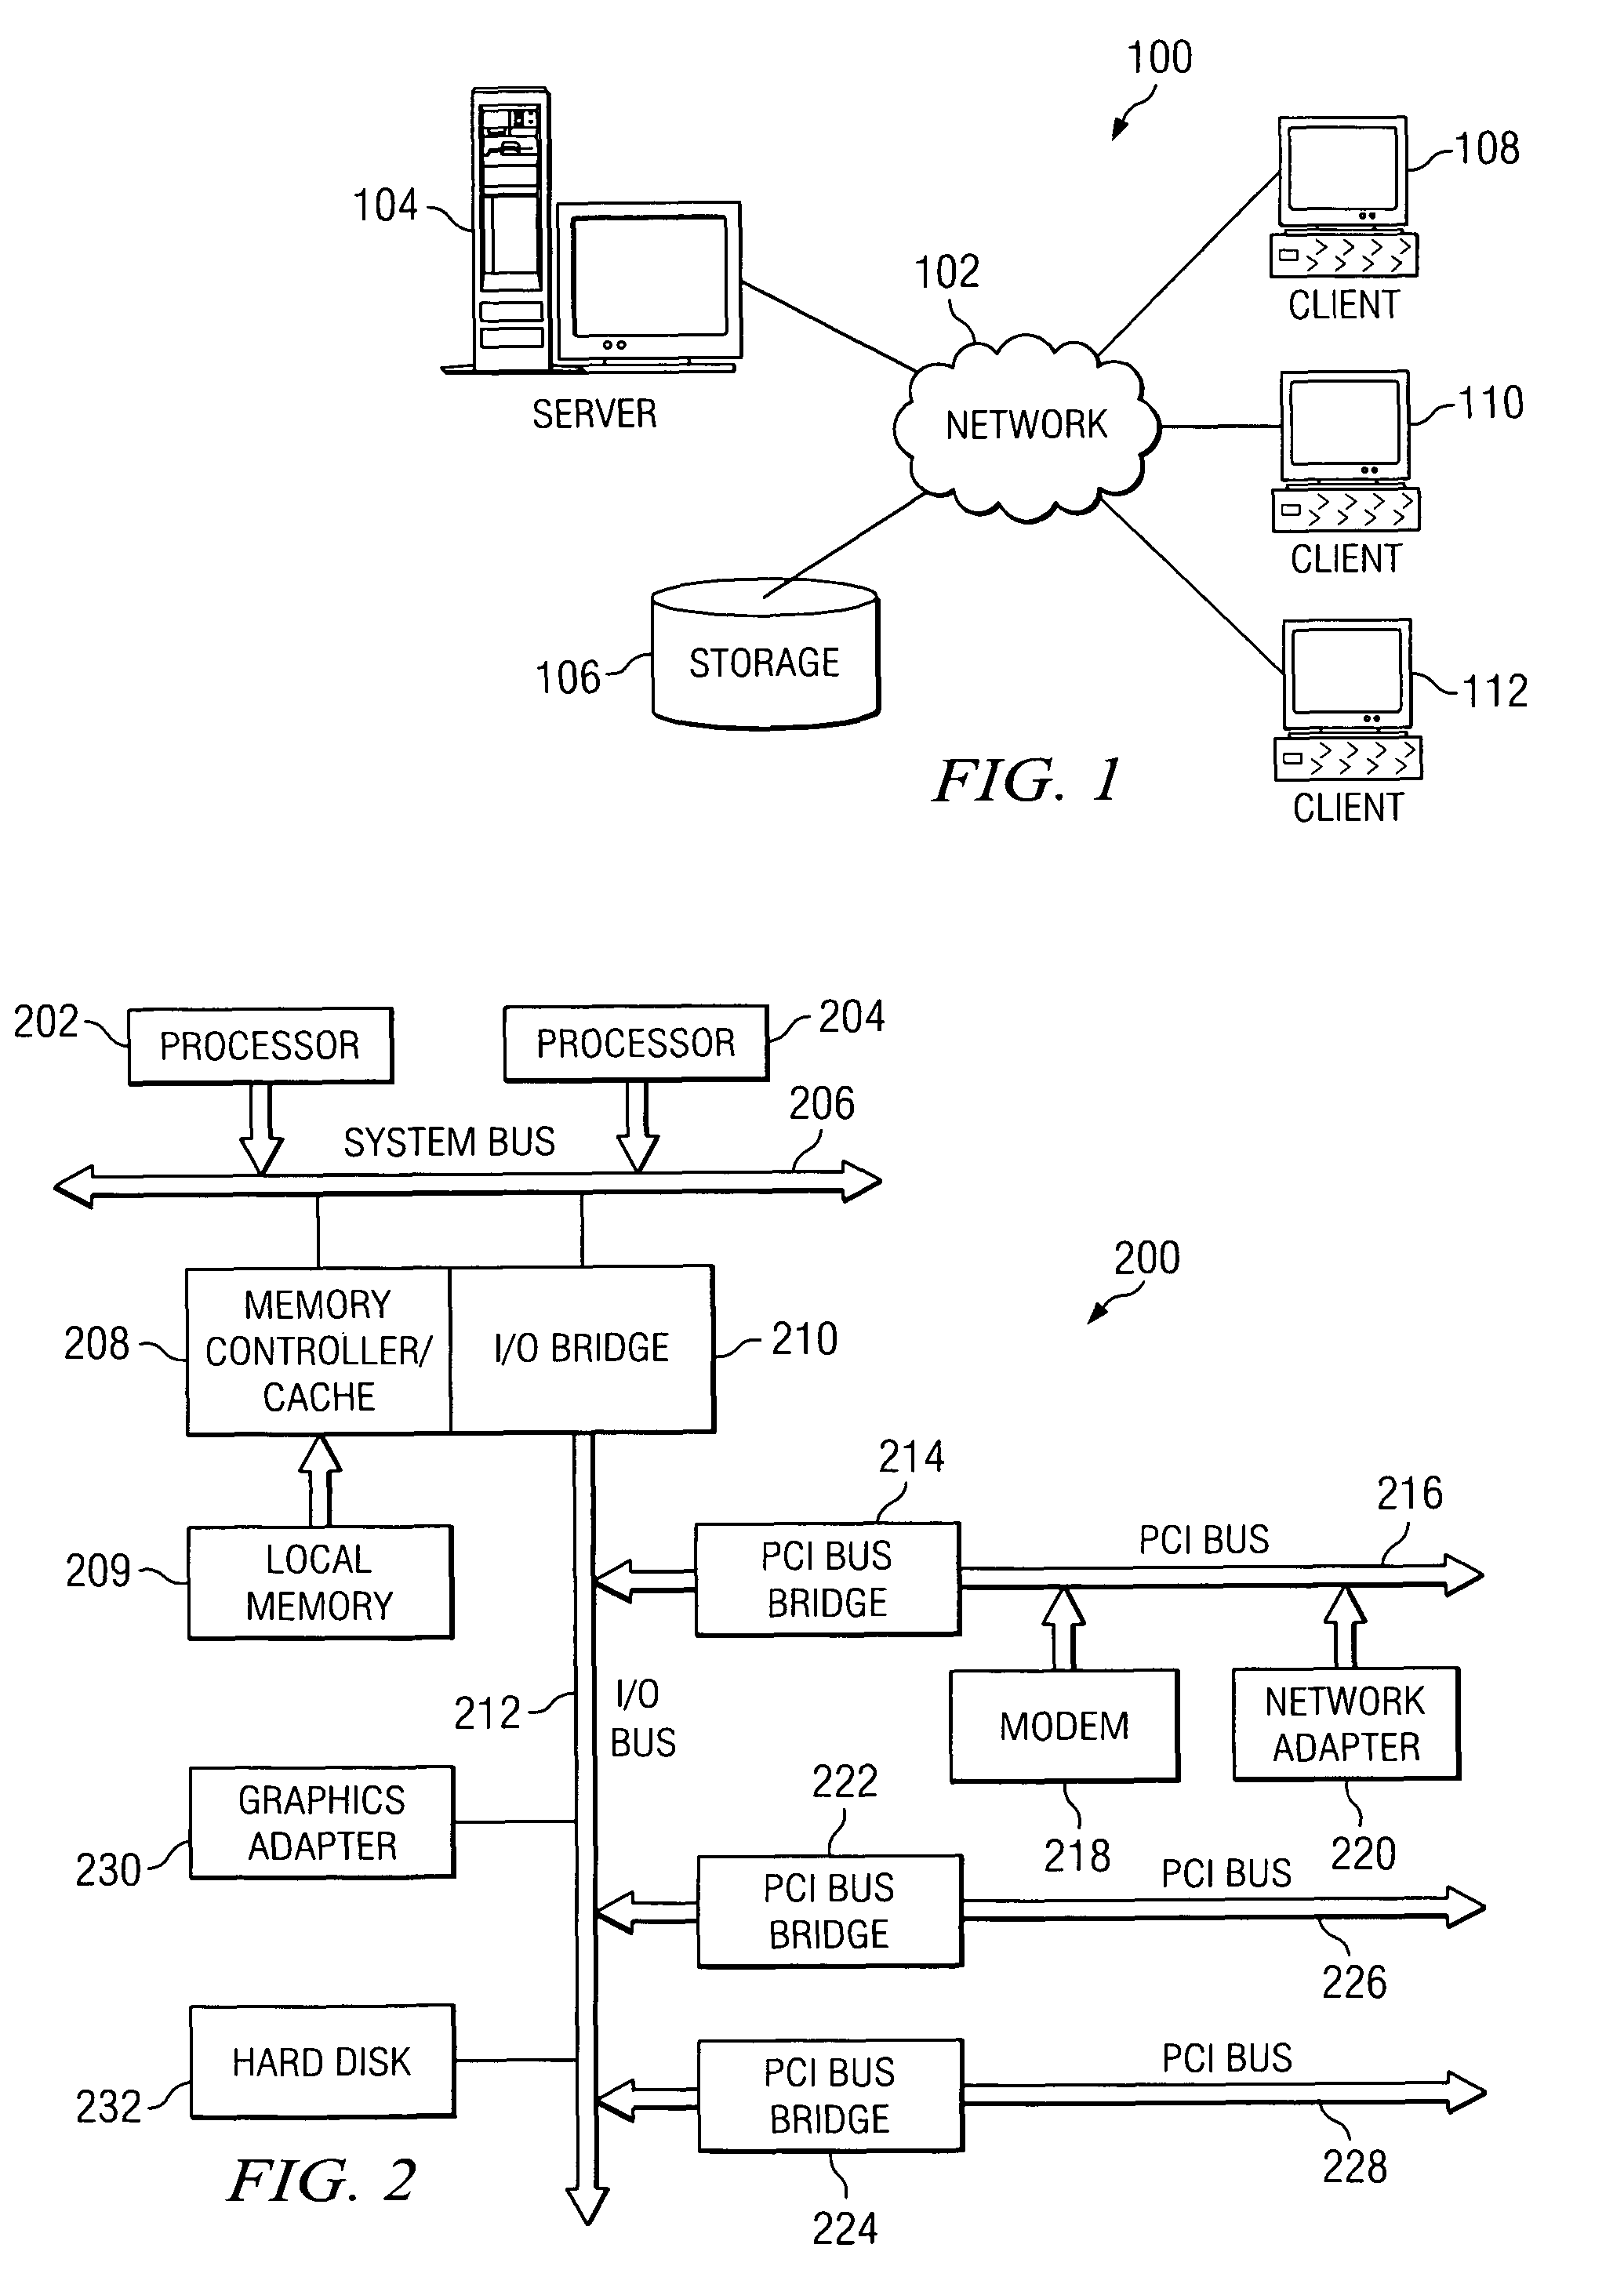 System and method for providing an embedded complete controller specification through explicit controller overlays